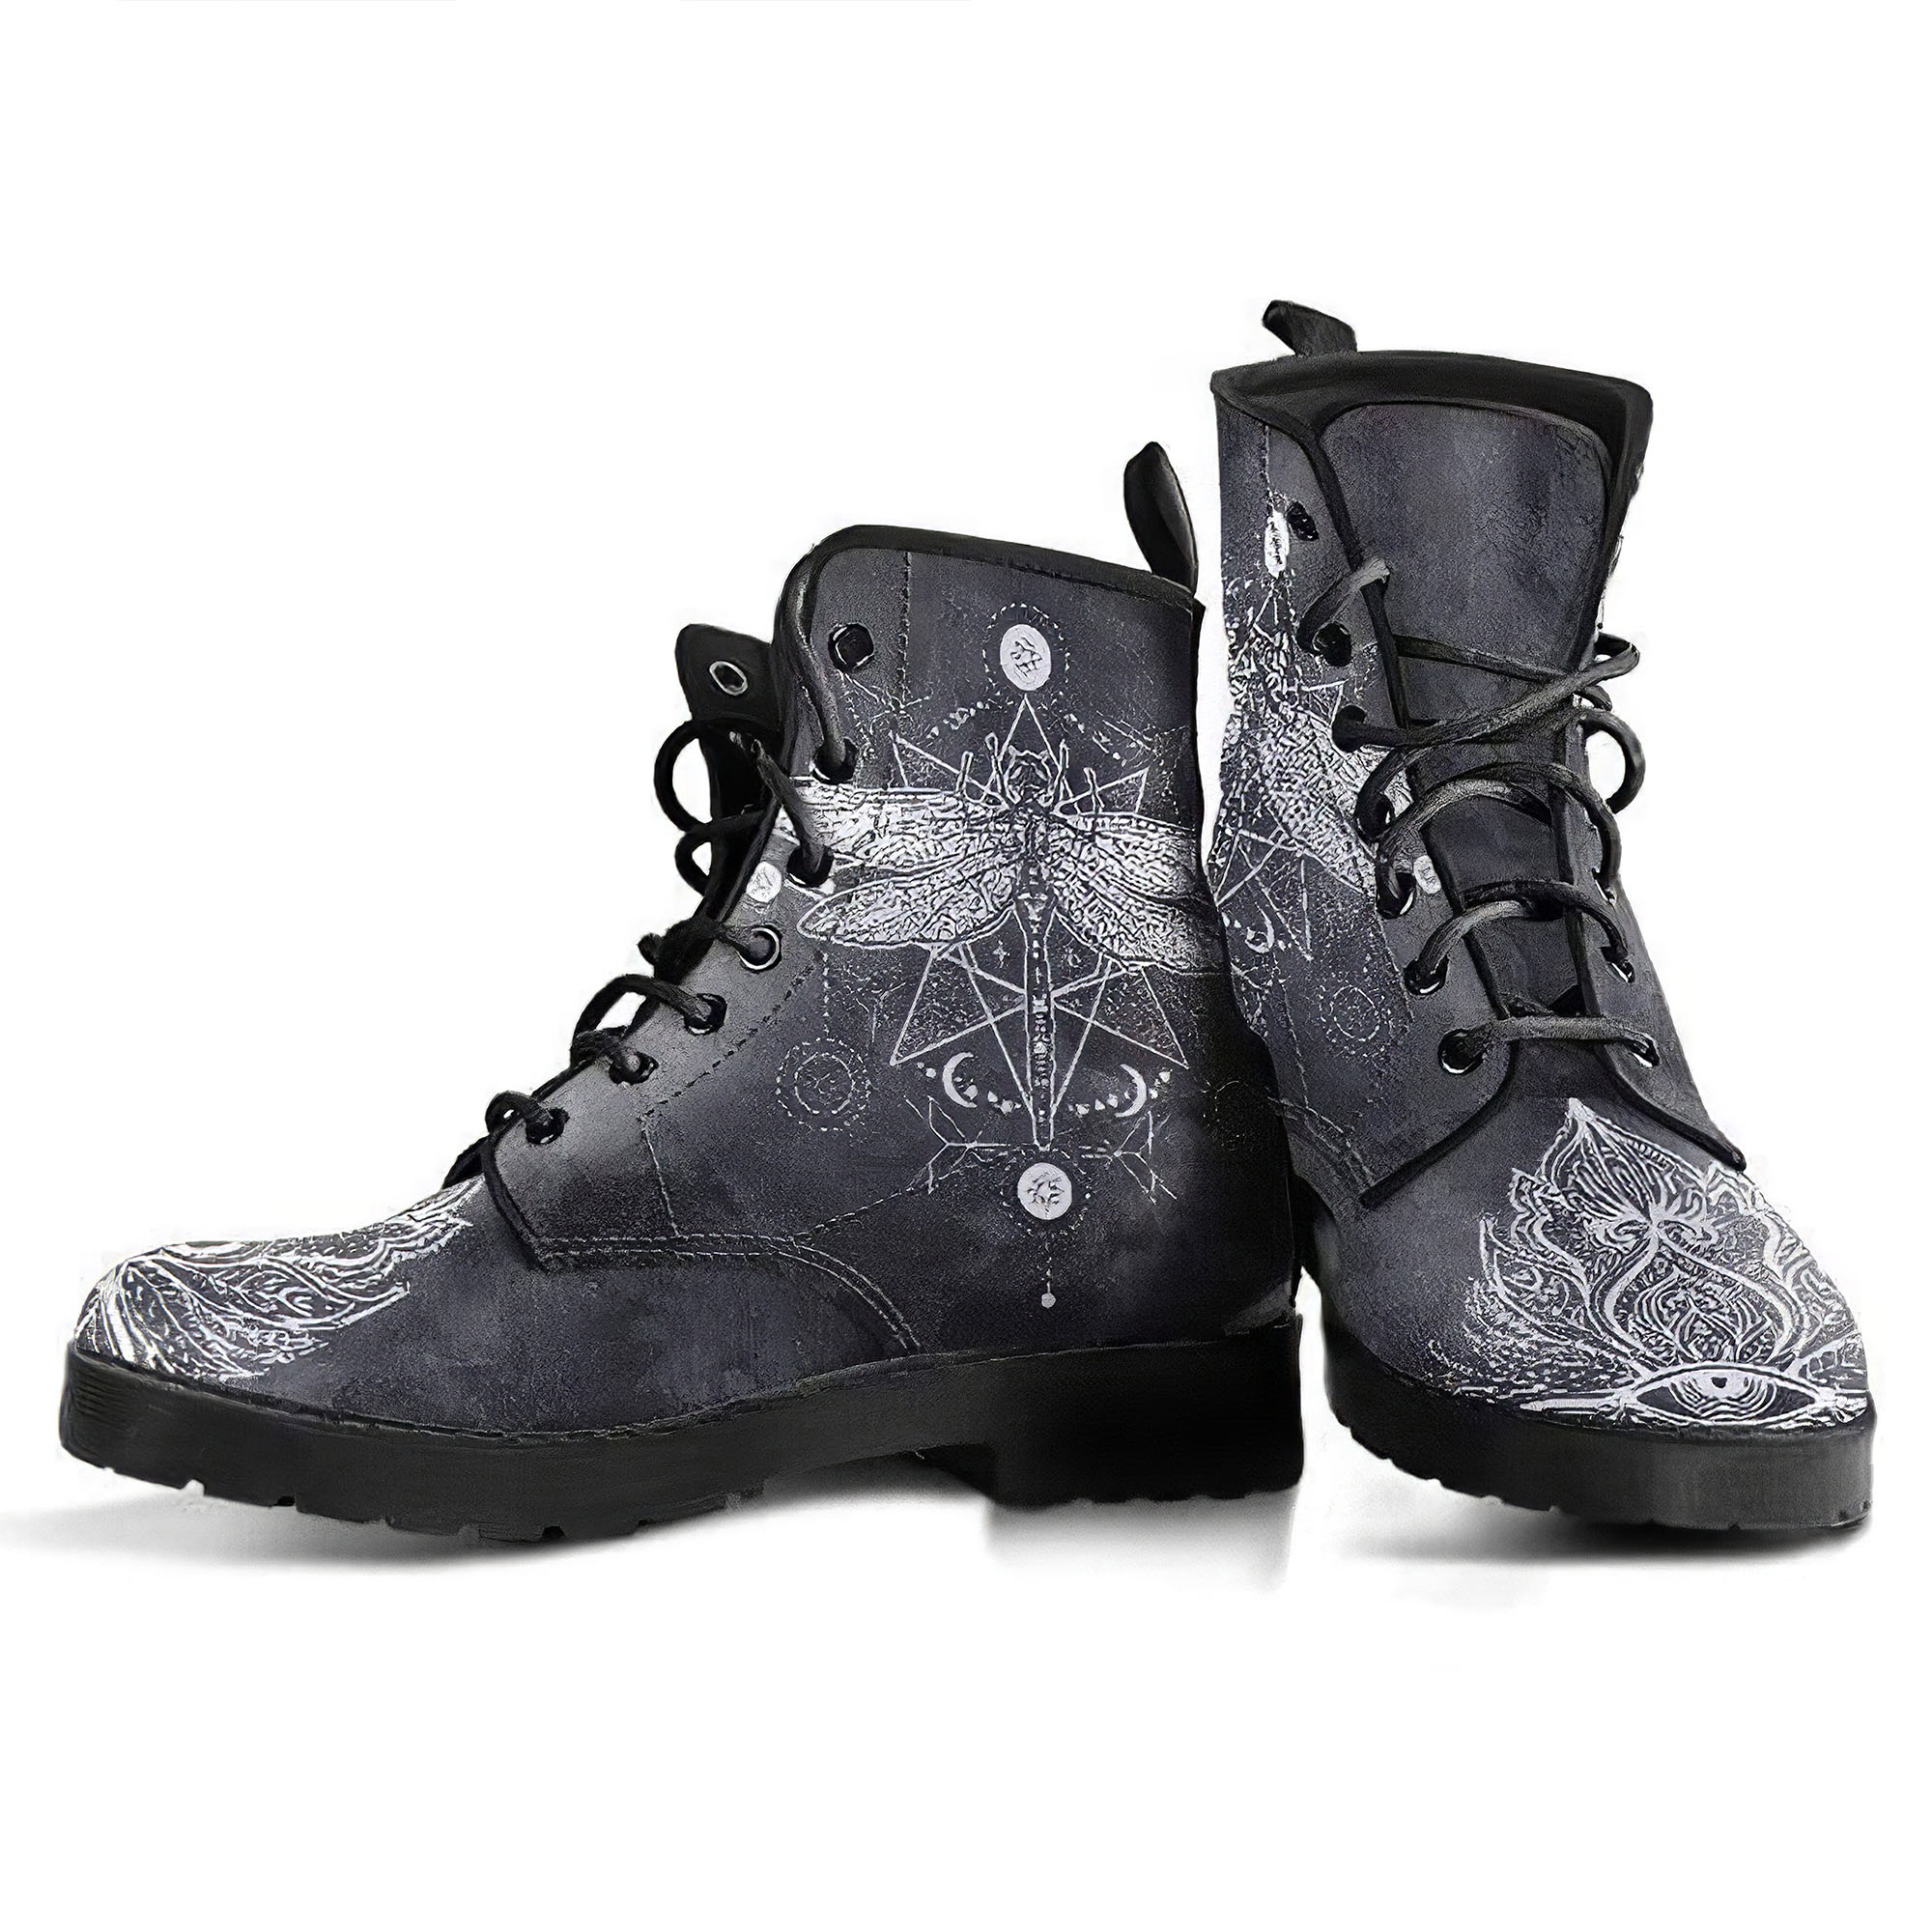 dragonfly-lotus-handcrafted-boots-gp-main.jpg